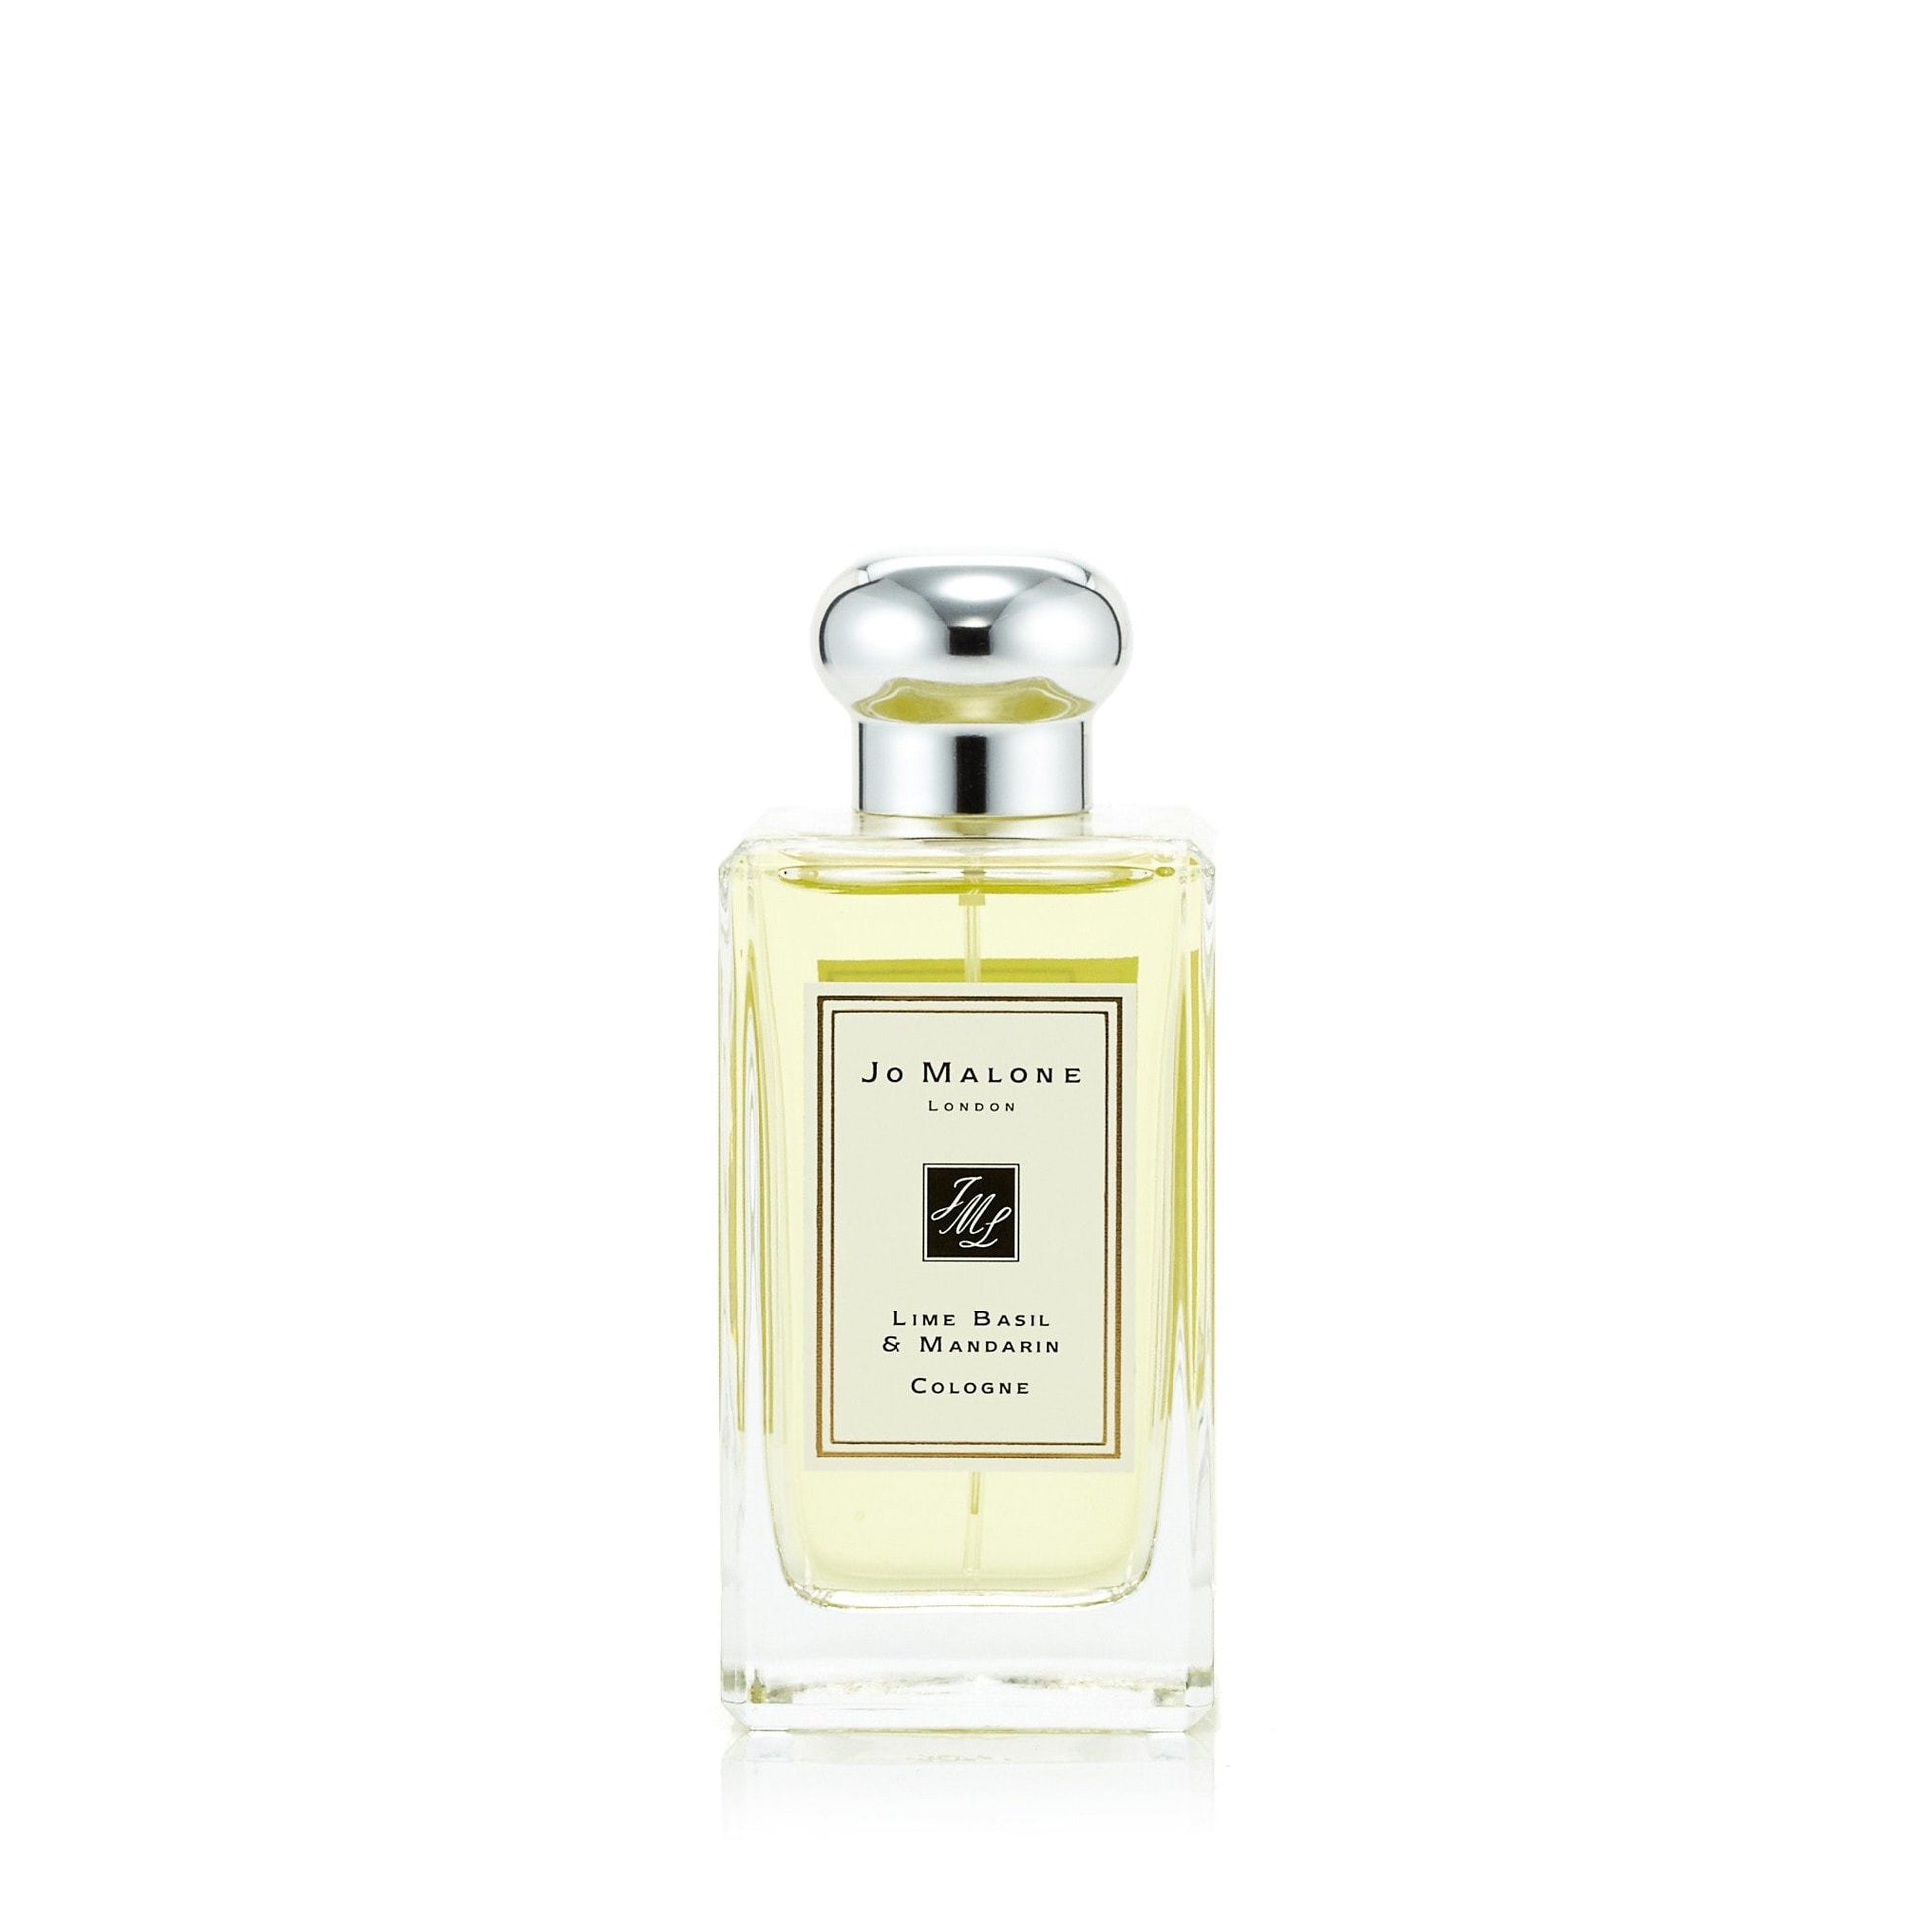 Lime Basil & Mandarin Cologne for Women and Men by Jo Malone, Product image 2